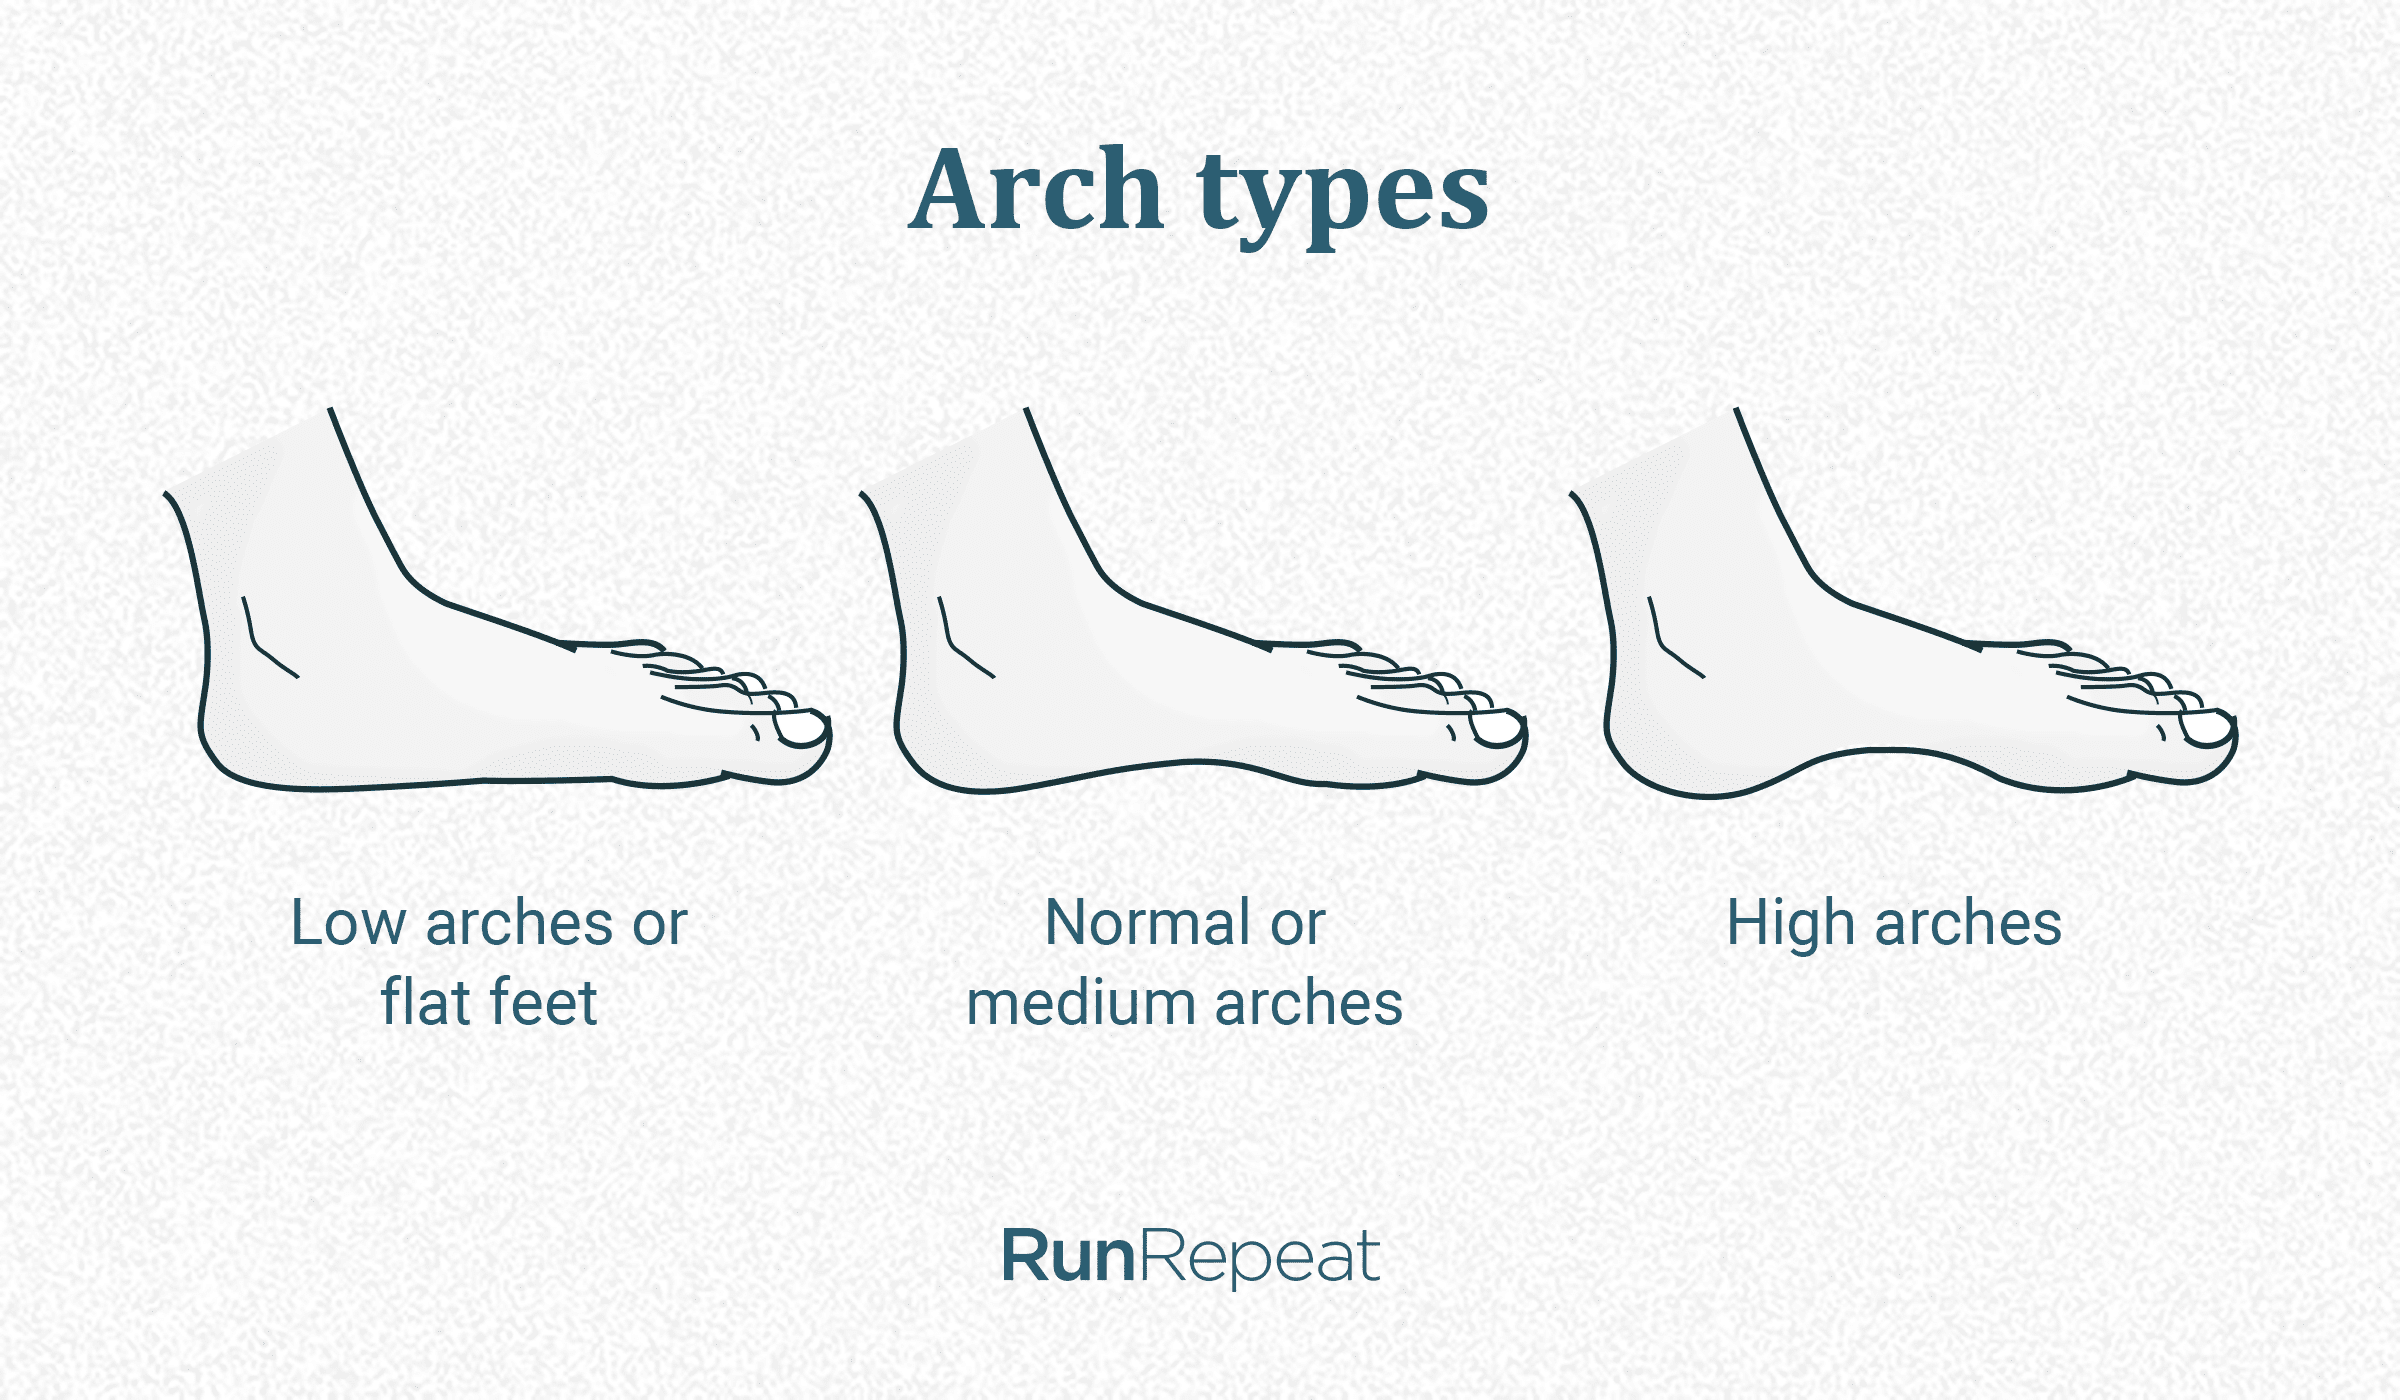 foot arch meaning